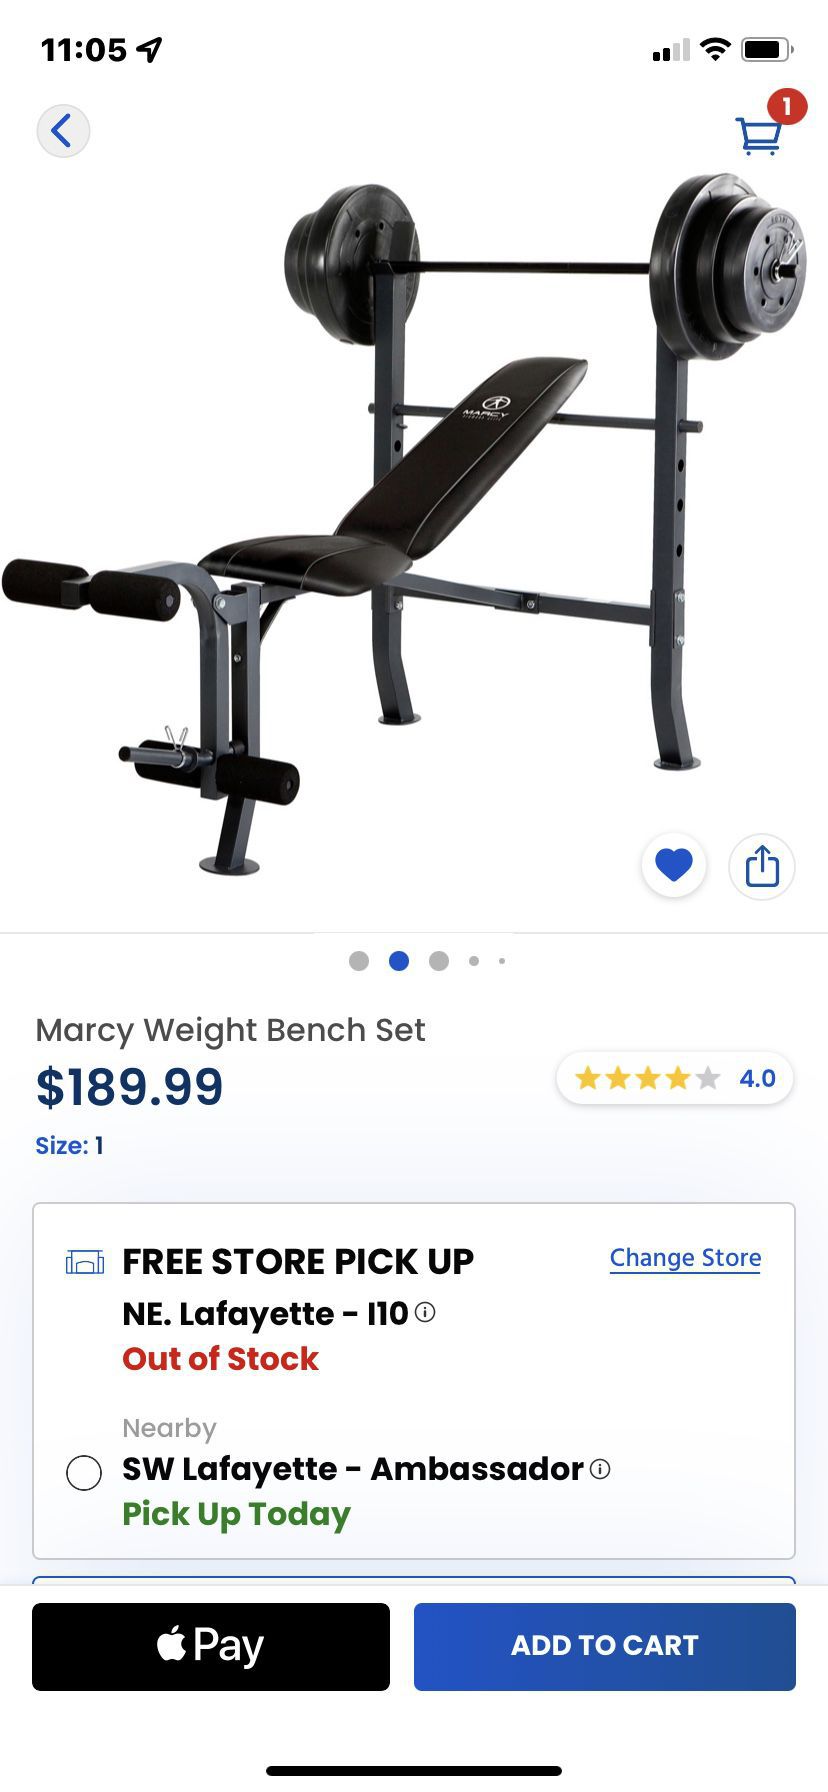 Marcy Weight Bench Without weights